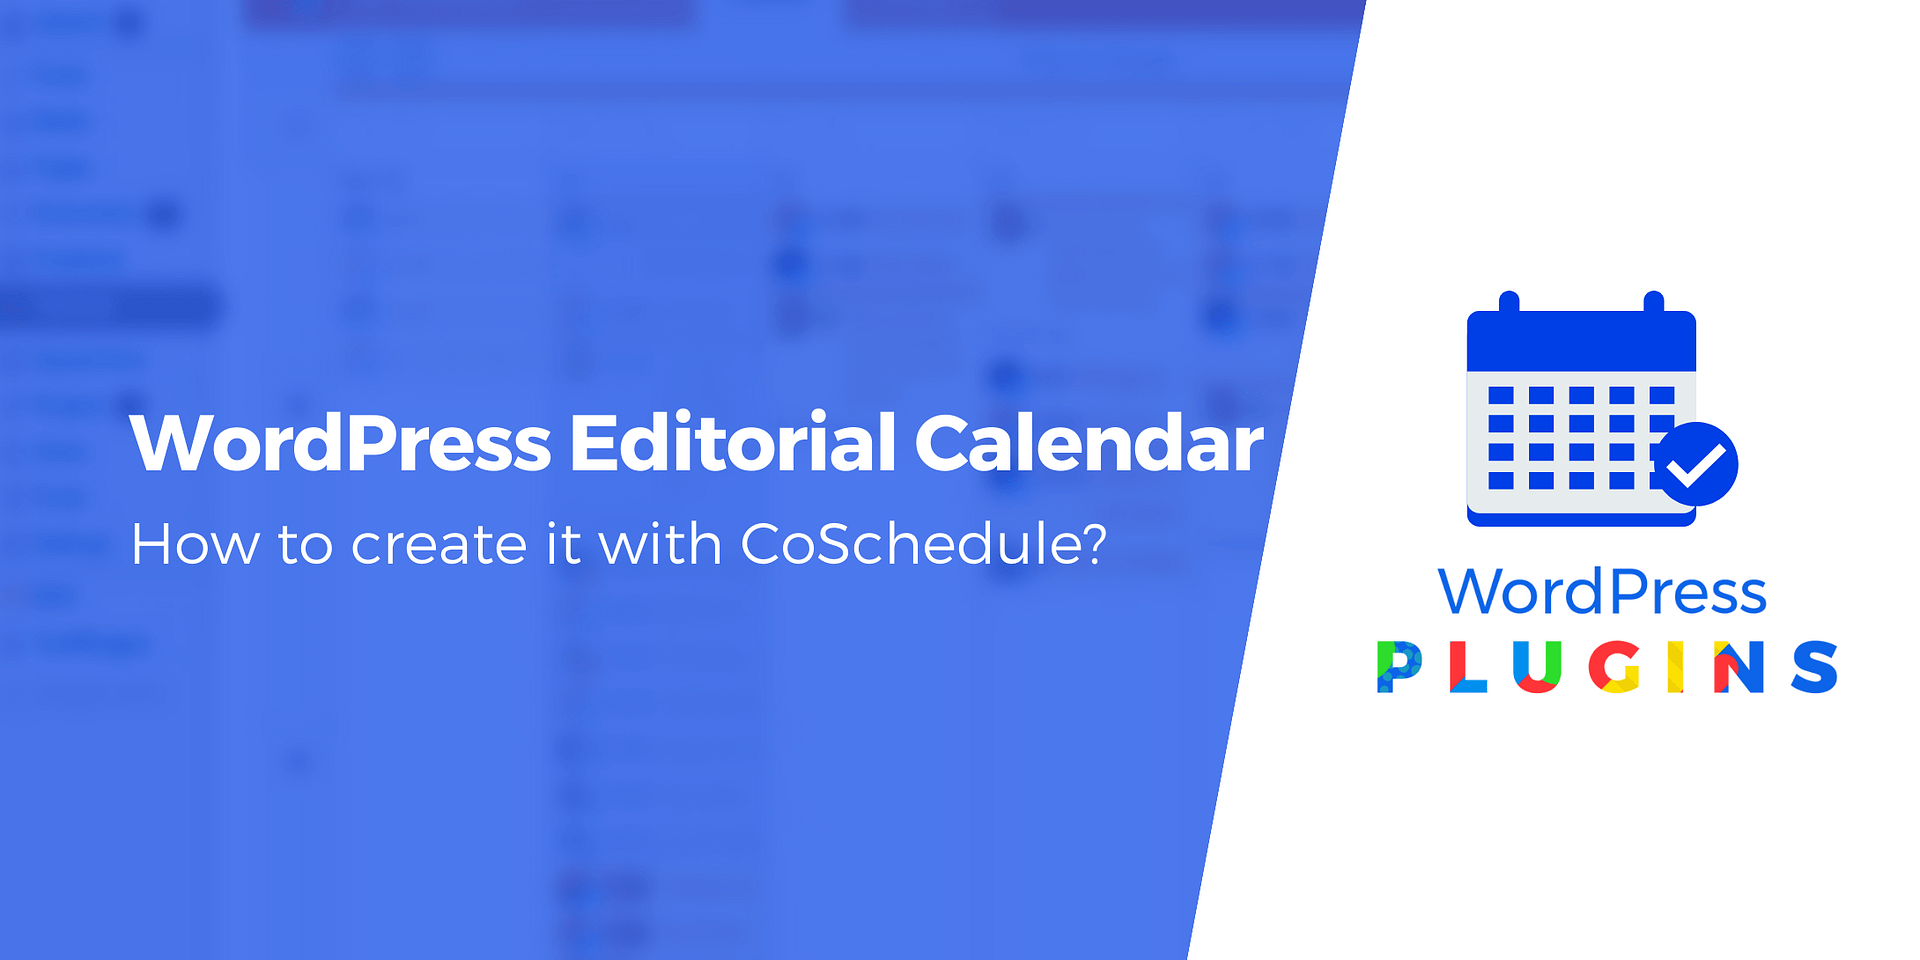 How to Create a WordPress Editorial Calendar With CoSchedule